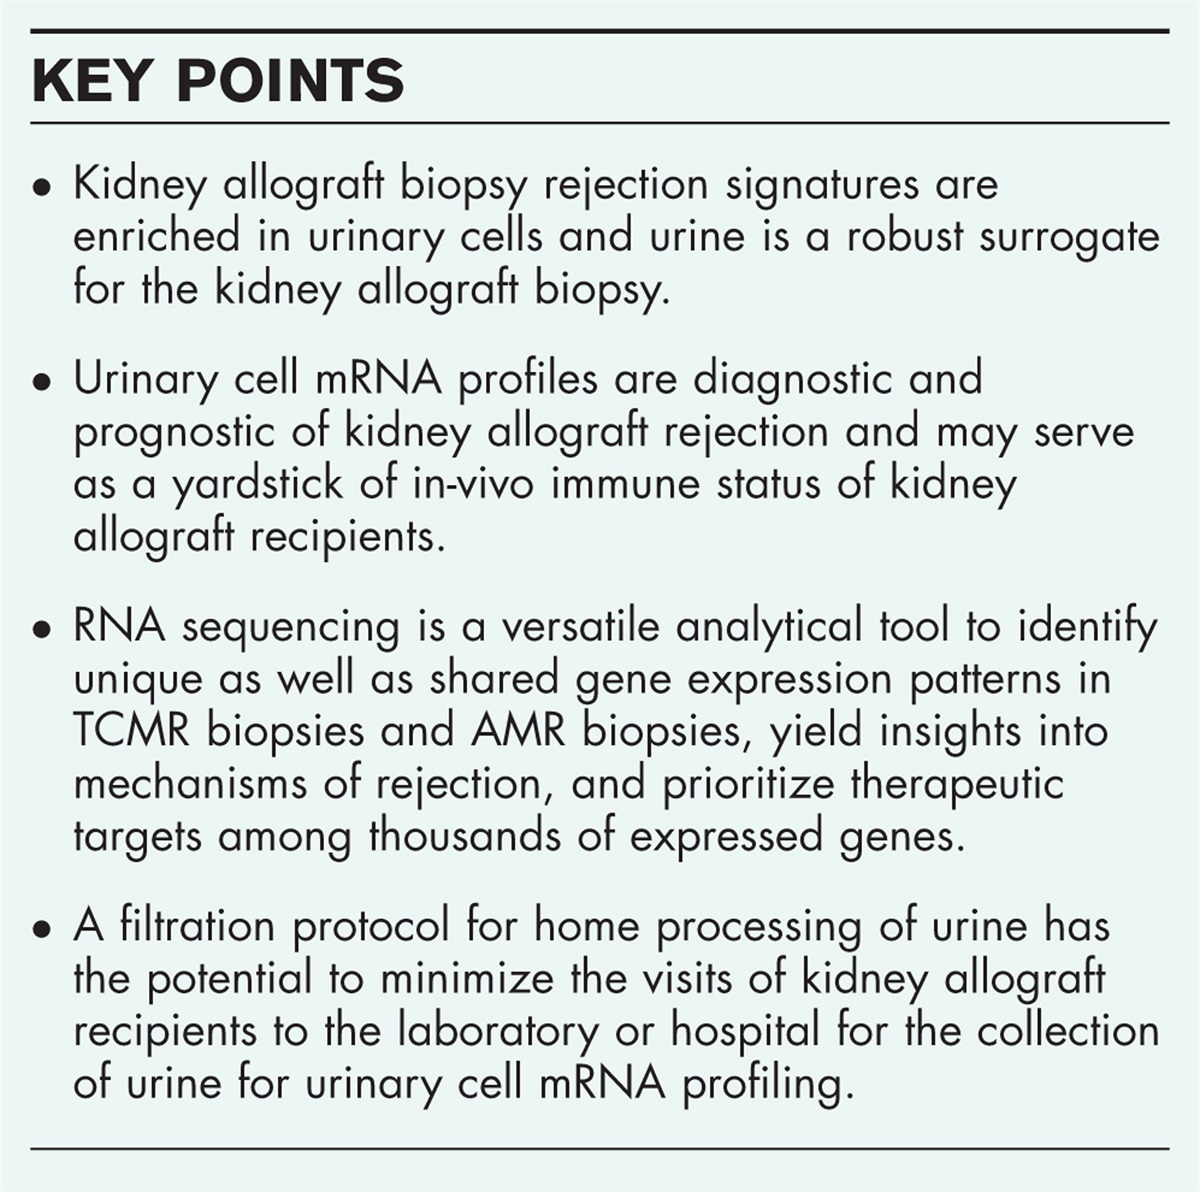 Urine as liquid gold: the transcriptional landscape of acute rejection defined by urinary cell mRNA profiling of kidney allograft recipients